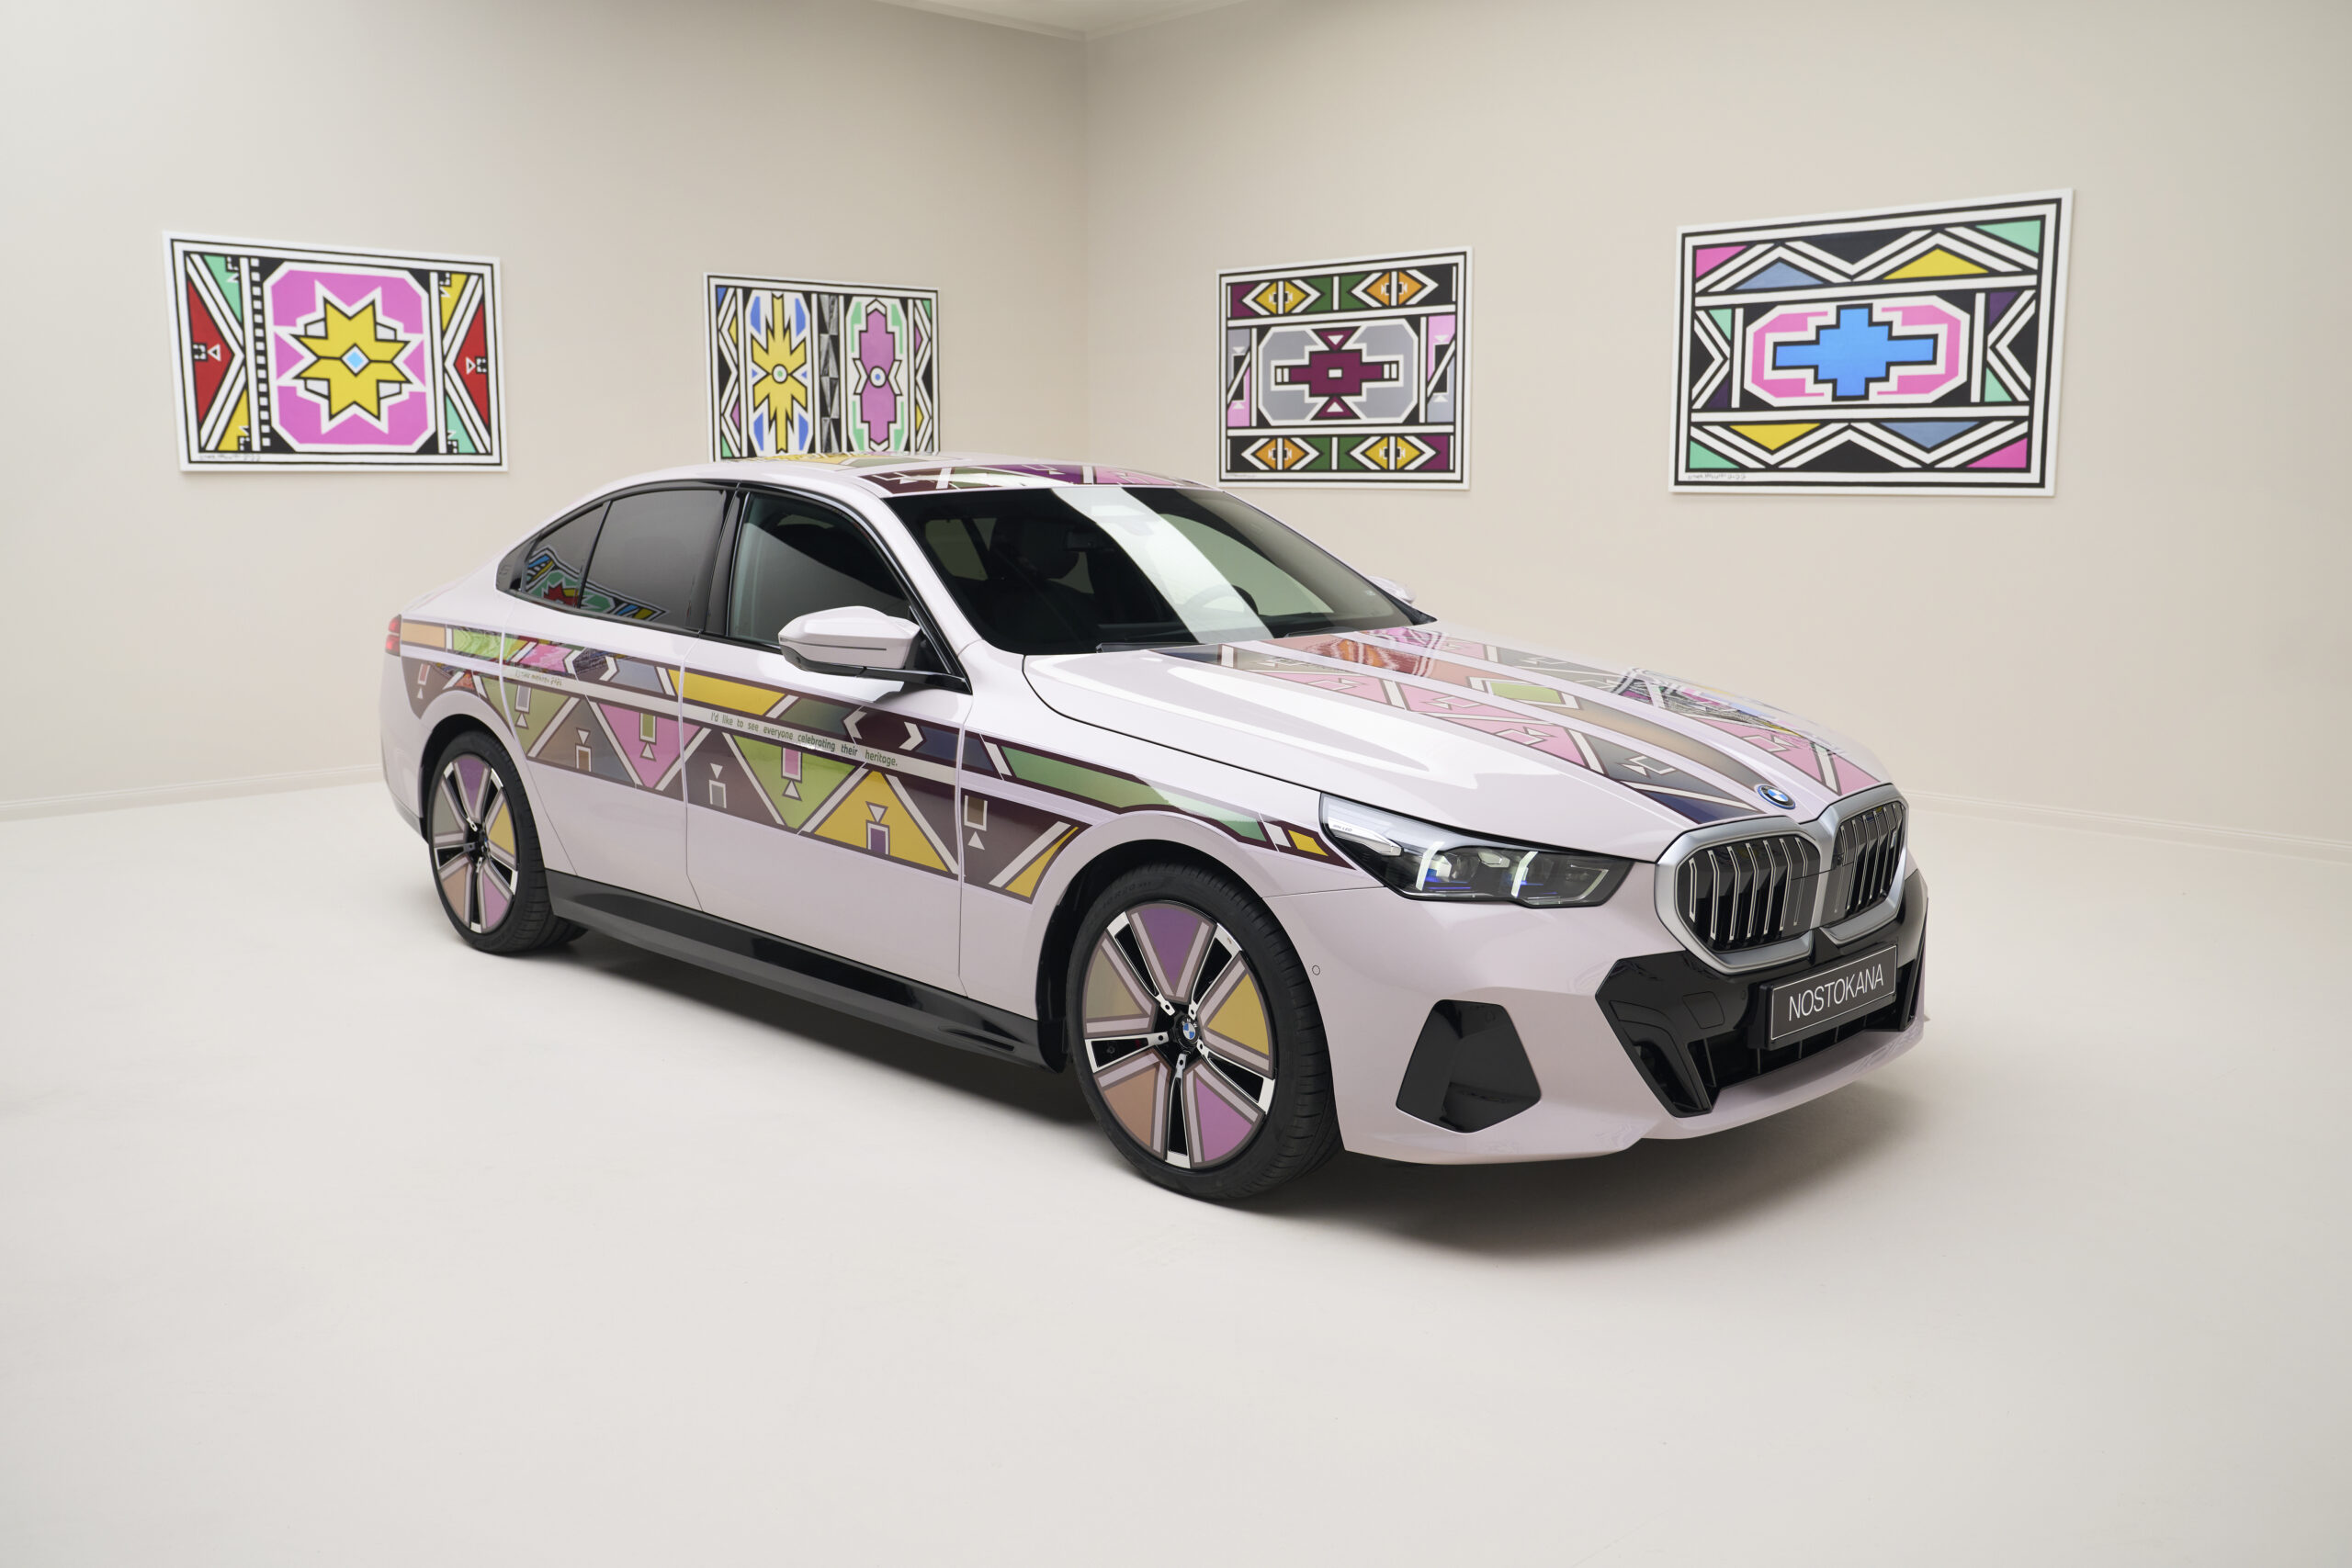 The latest BMW Art Car features innovative E-Ink technology that can change colors and display animations.